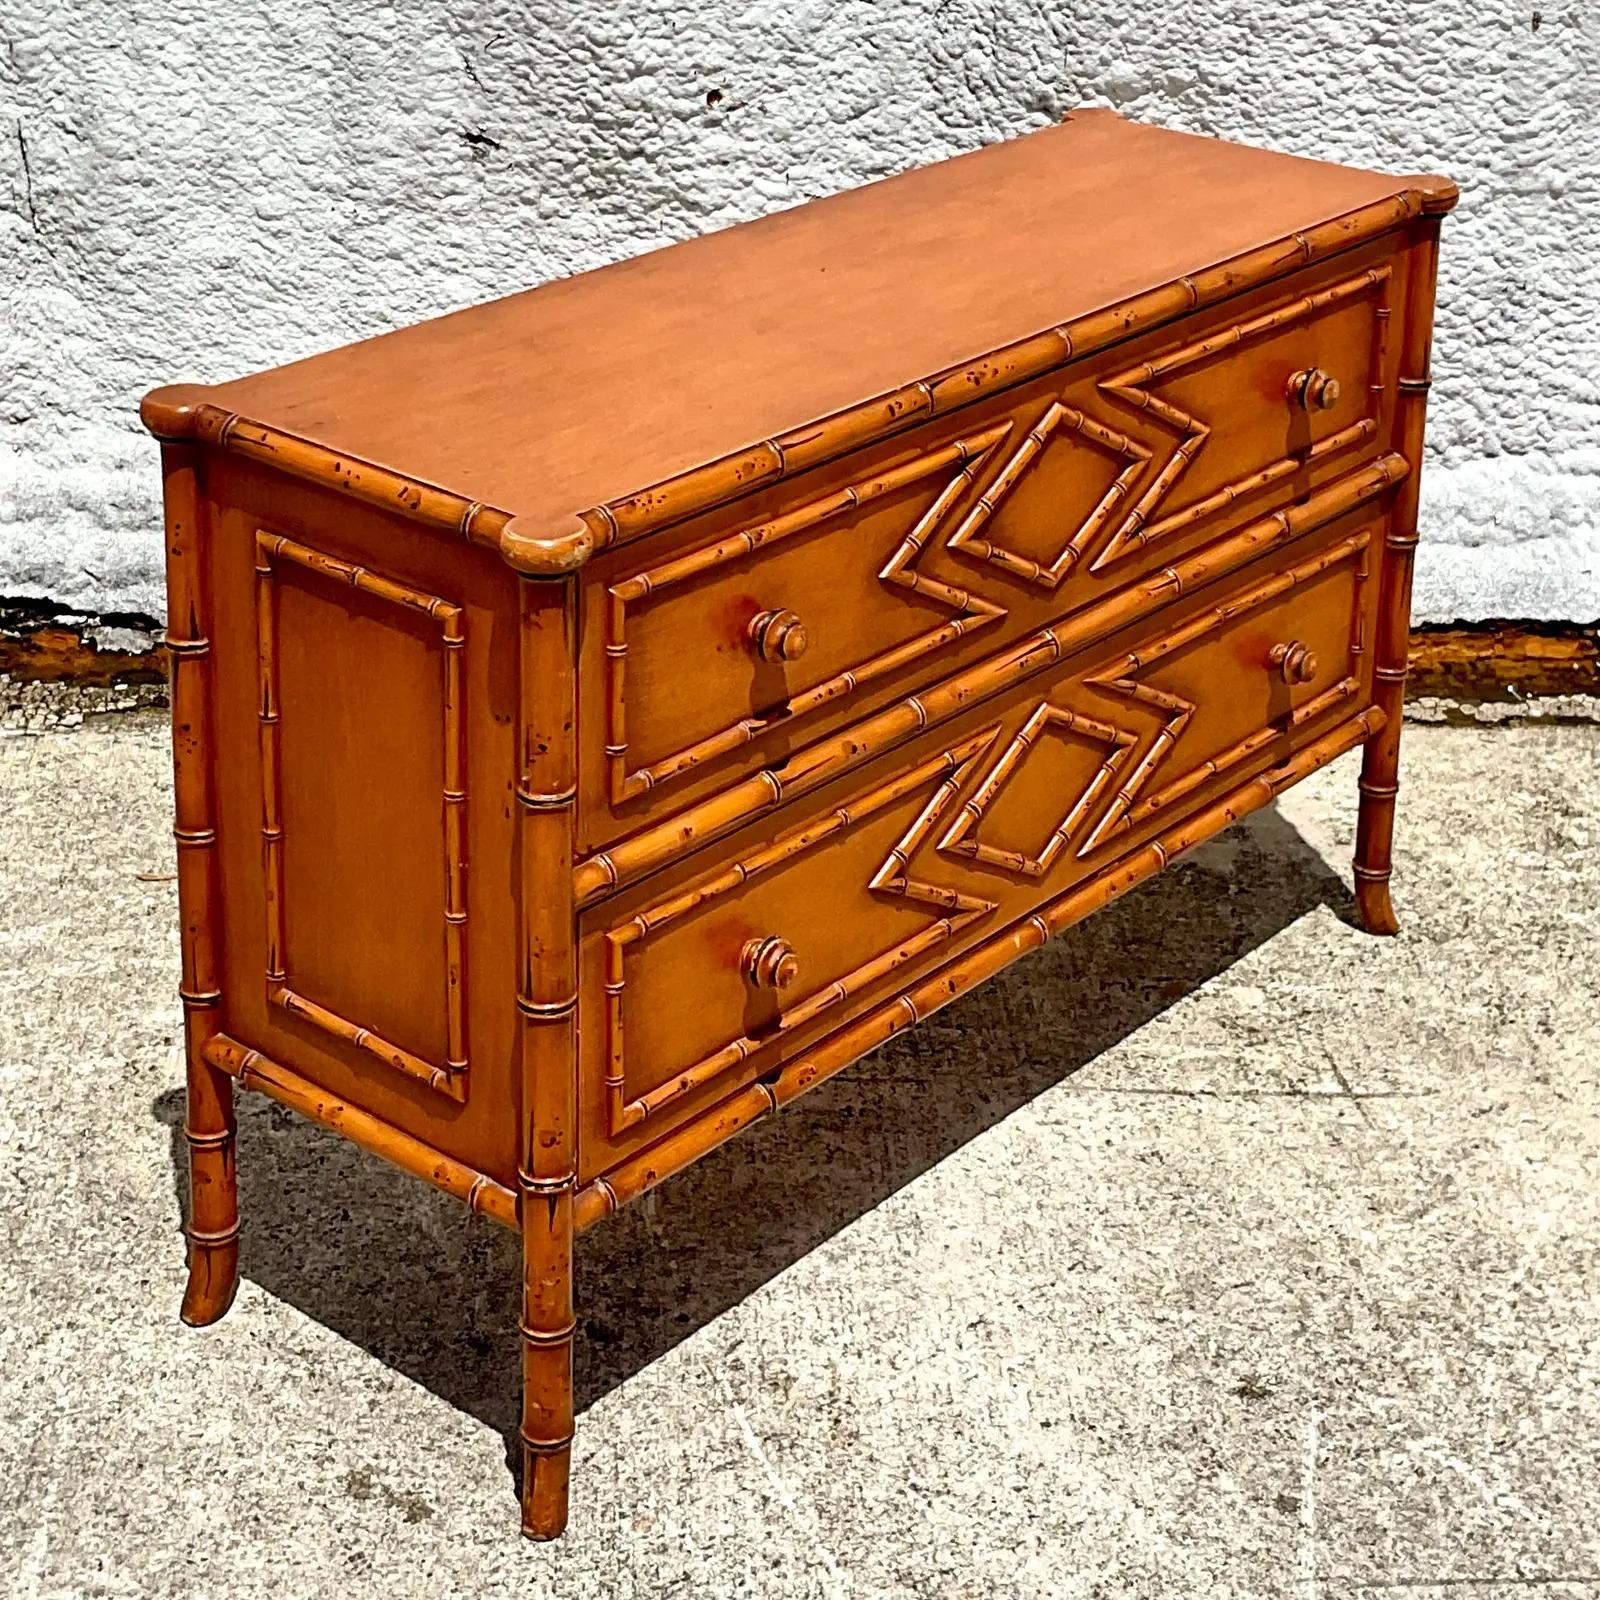 North American Vintage Coastal Carved Bamboo Chest of Drawers